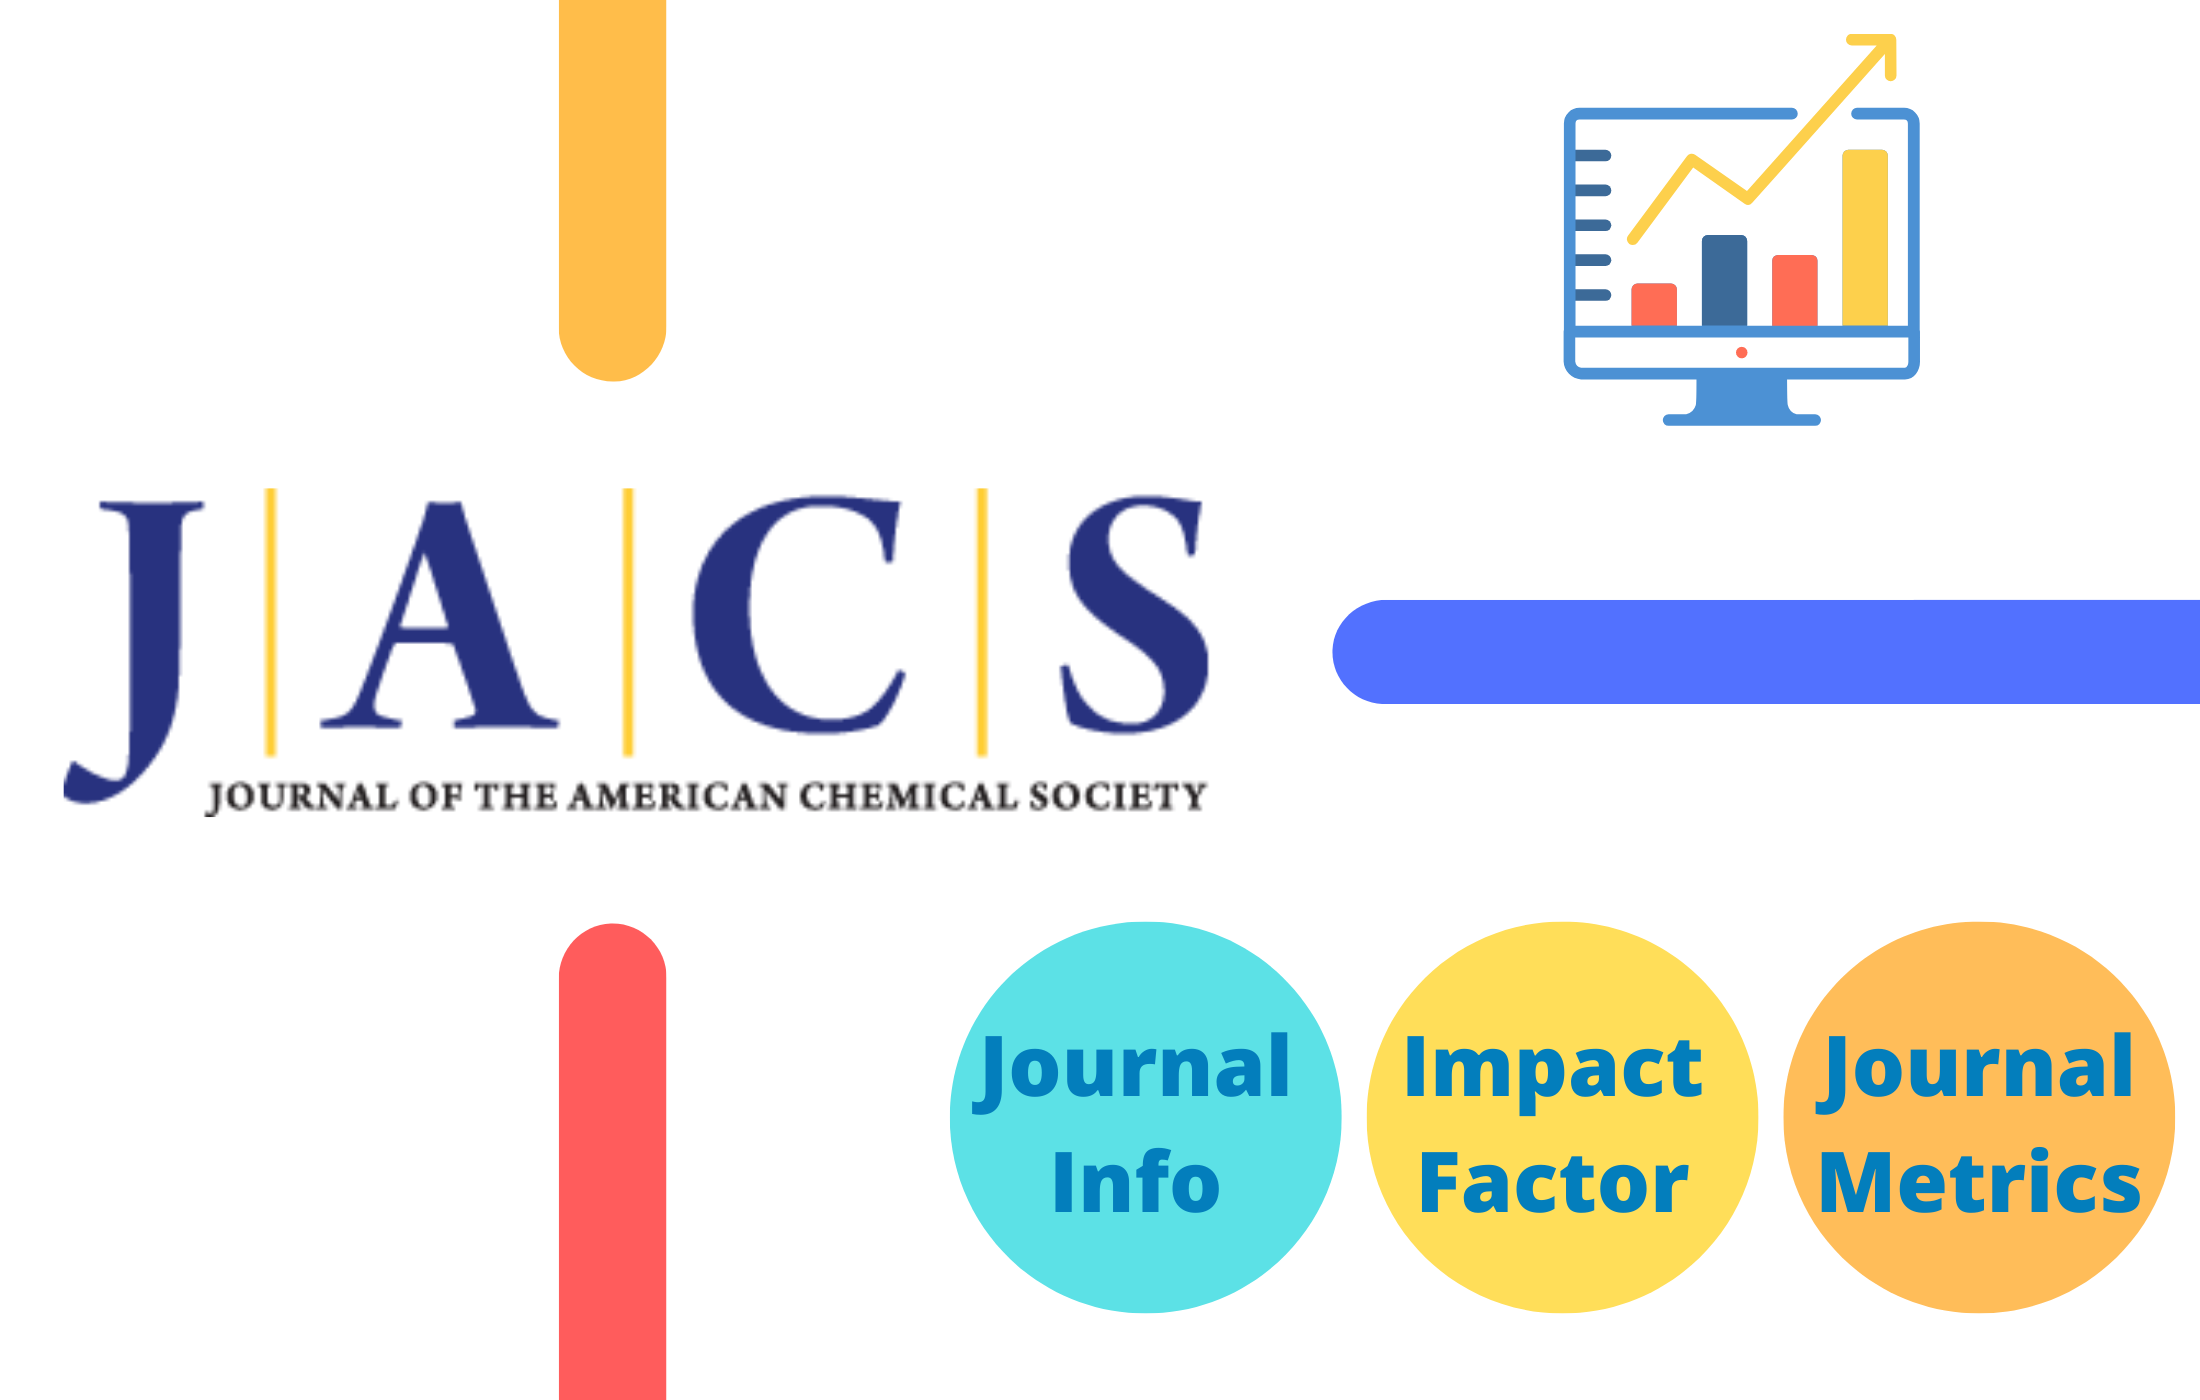 Journal of the chemical society. Journal of the American Chemical Society. Impact Factor of Journal. Импакт-фактор. Impact Factor icon.